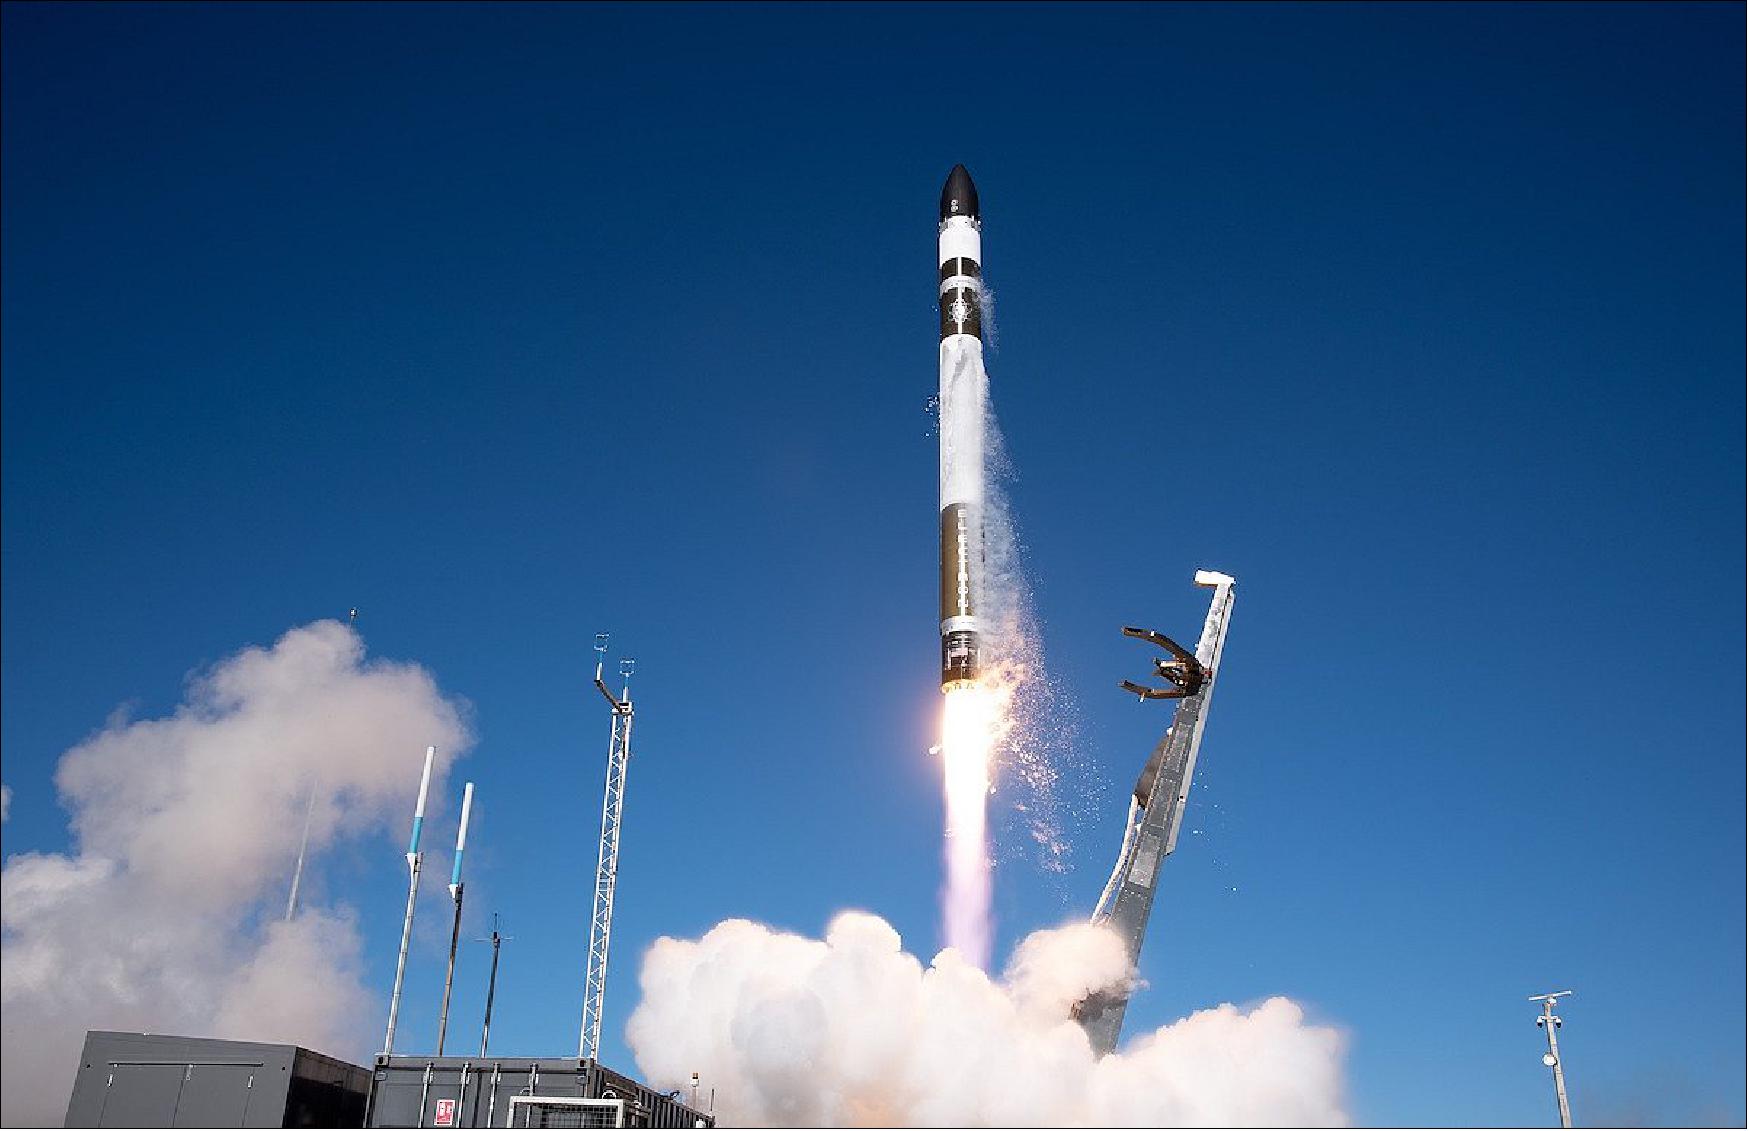 Figure 47: Rocket Lab’s Electron launcher lifts off from New Zealand's Launch Complex at Mahia on 31 August 2020 (03:05 GMT), image credit: Rocket Lab)